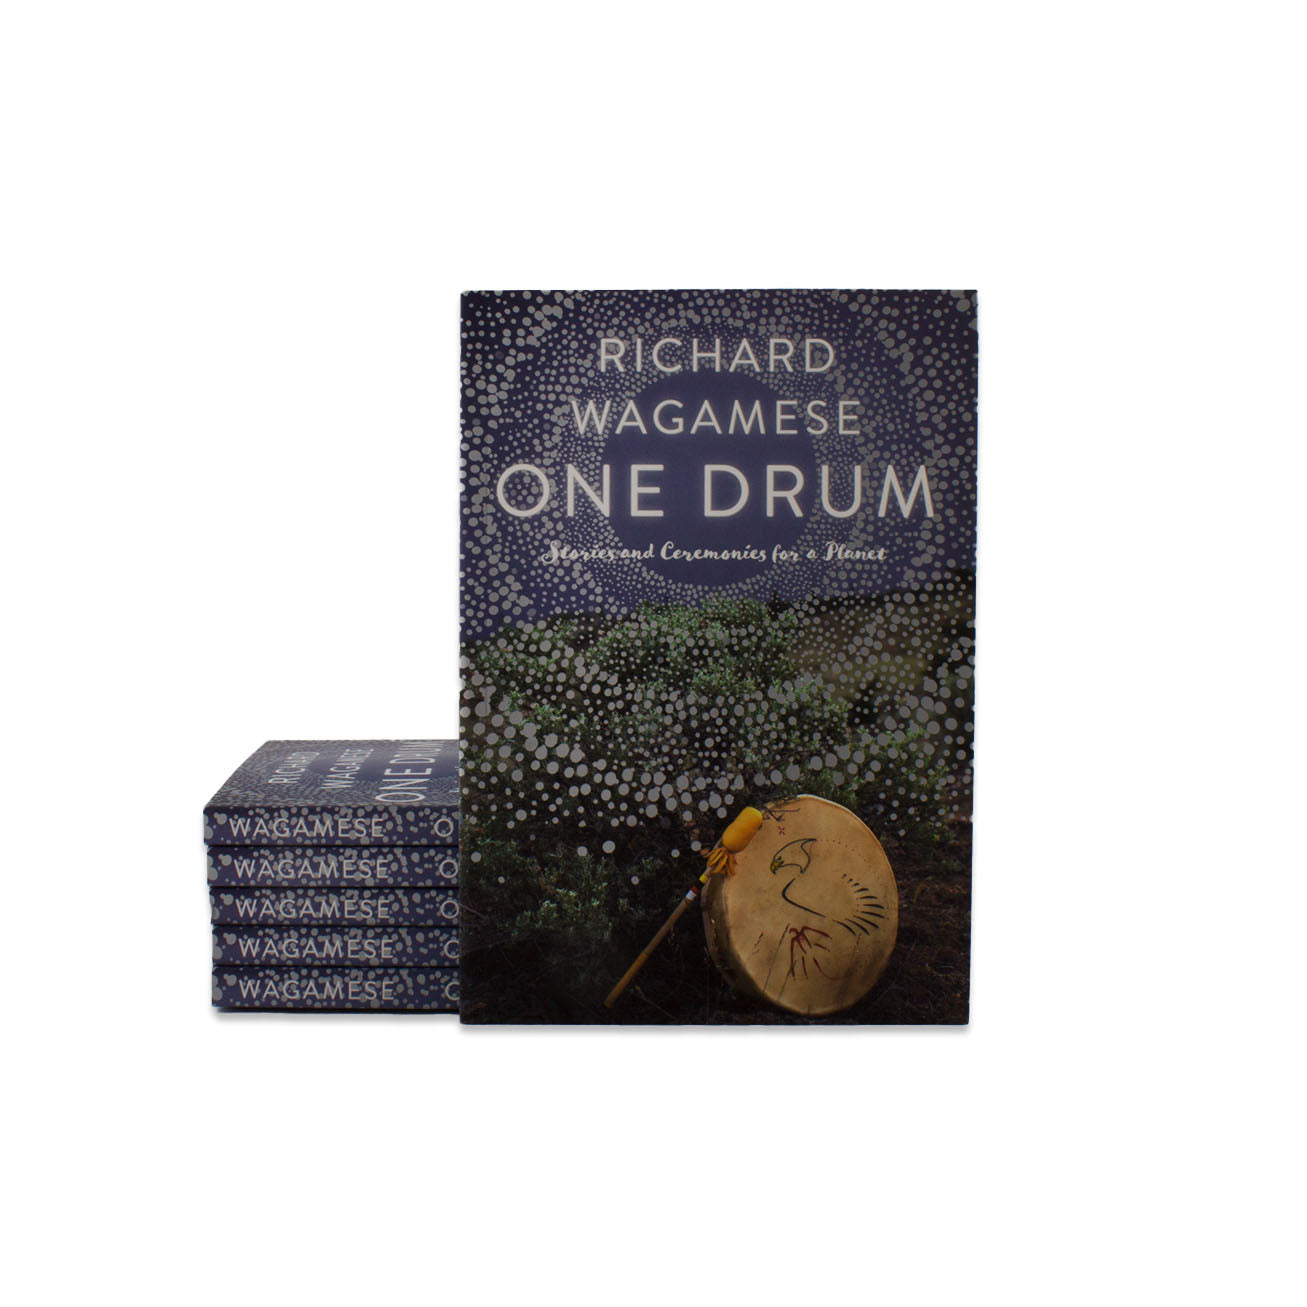 One Drum: Stories and Ceremonies for a Planet by Richard Wagamese